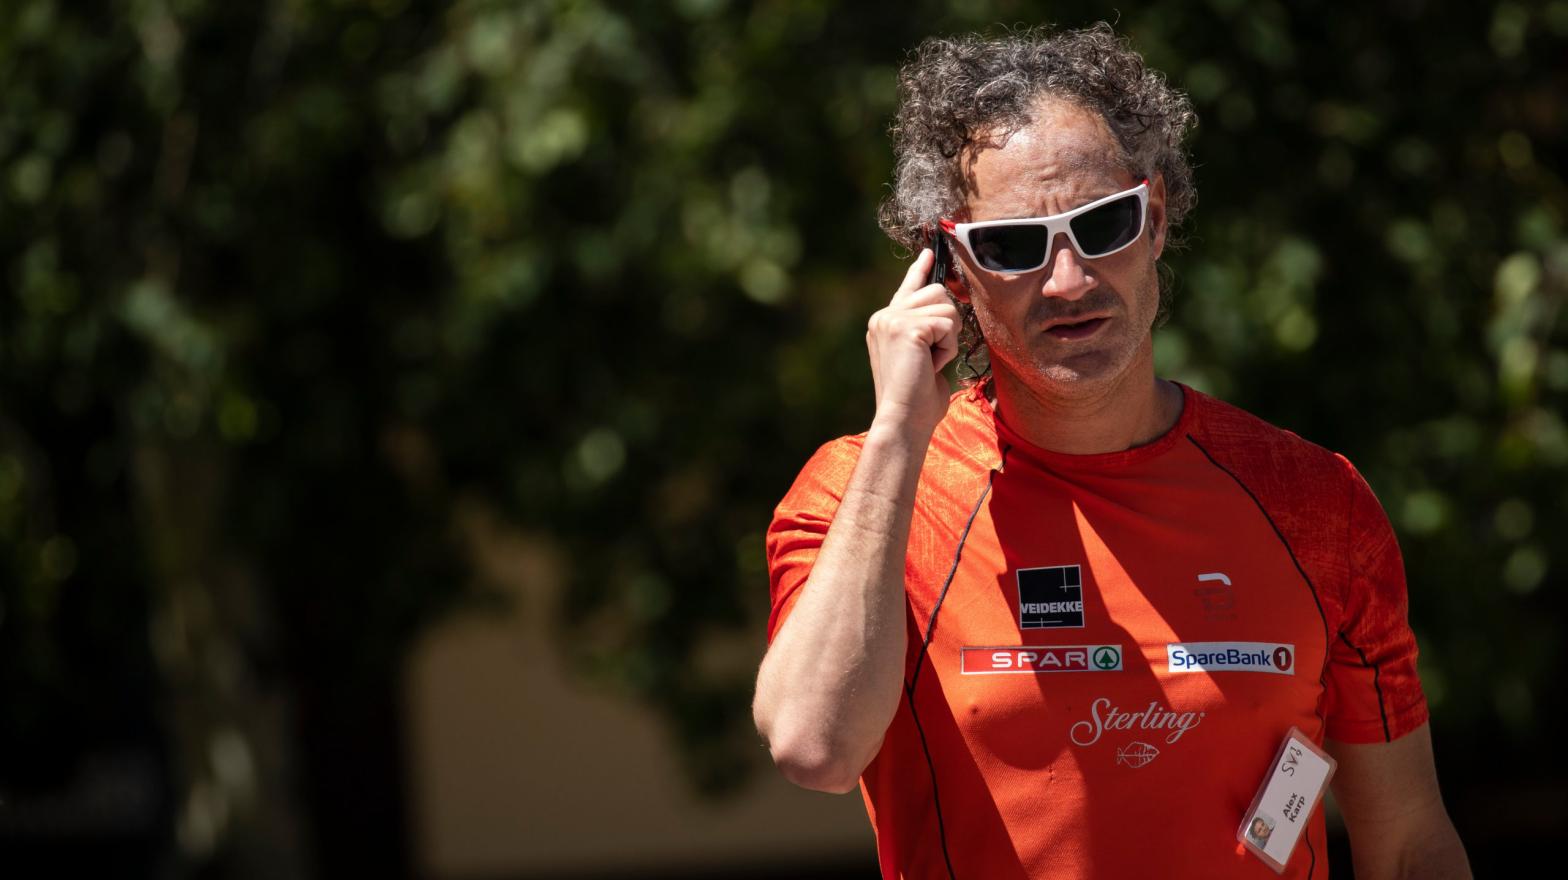 Palantir CEO Alex Karp at a July 2019 conference in Sun Valley, Idaho. (Photo: Drew Angerer, Getty Images)